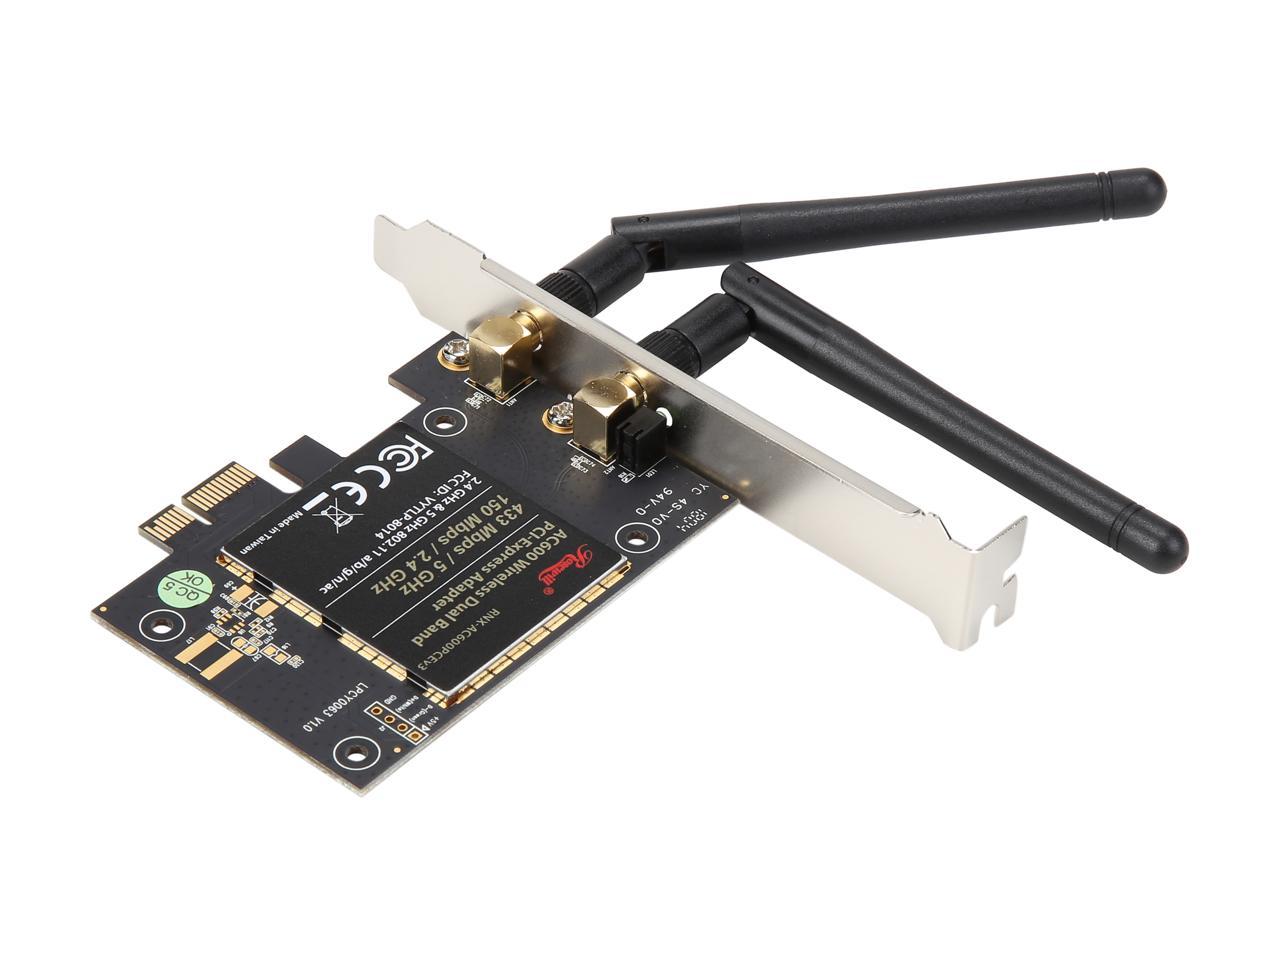 rosewill wireless n300 pcie wifi adapter driver download